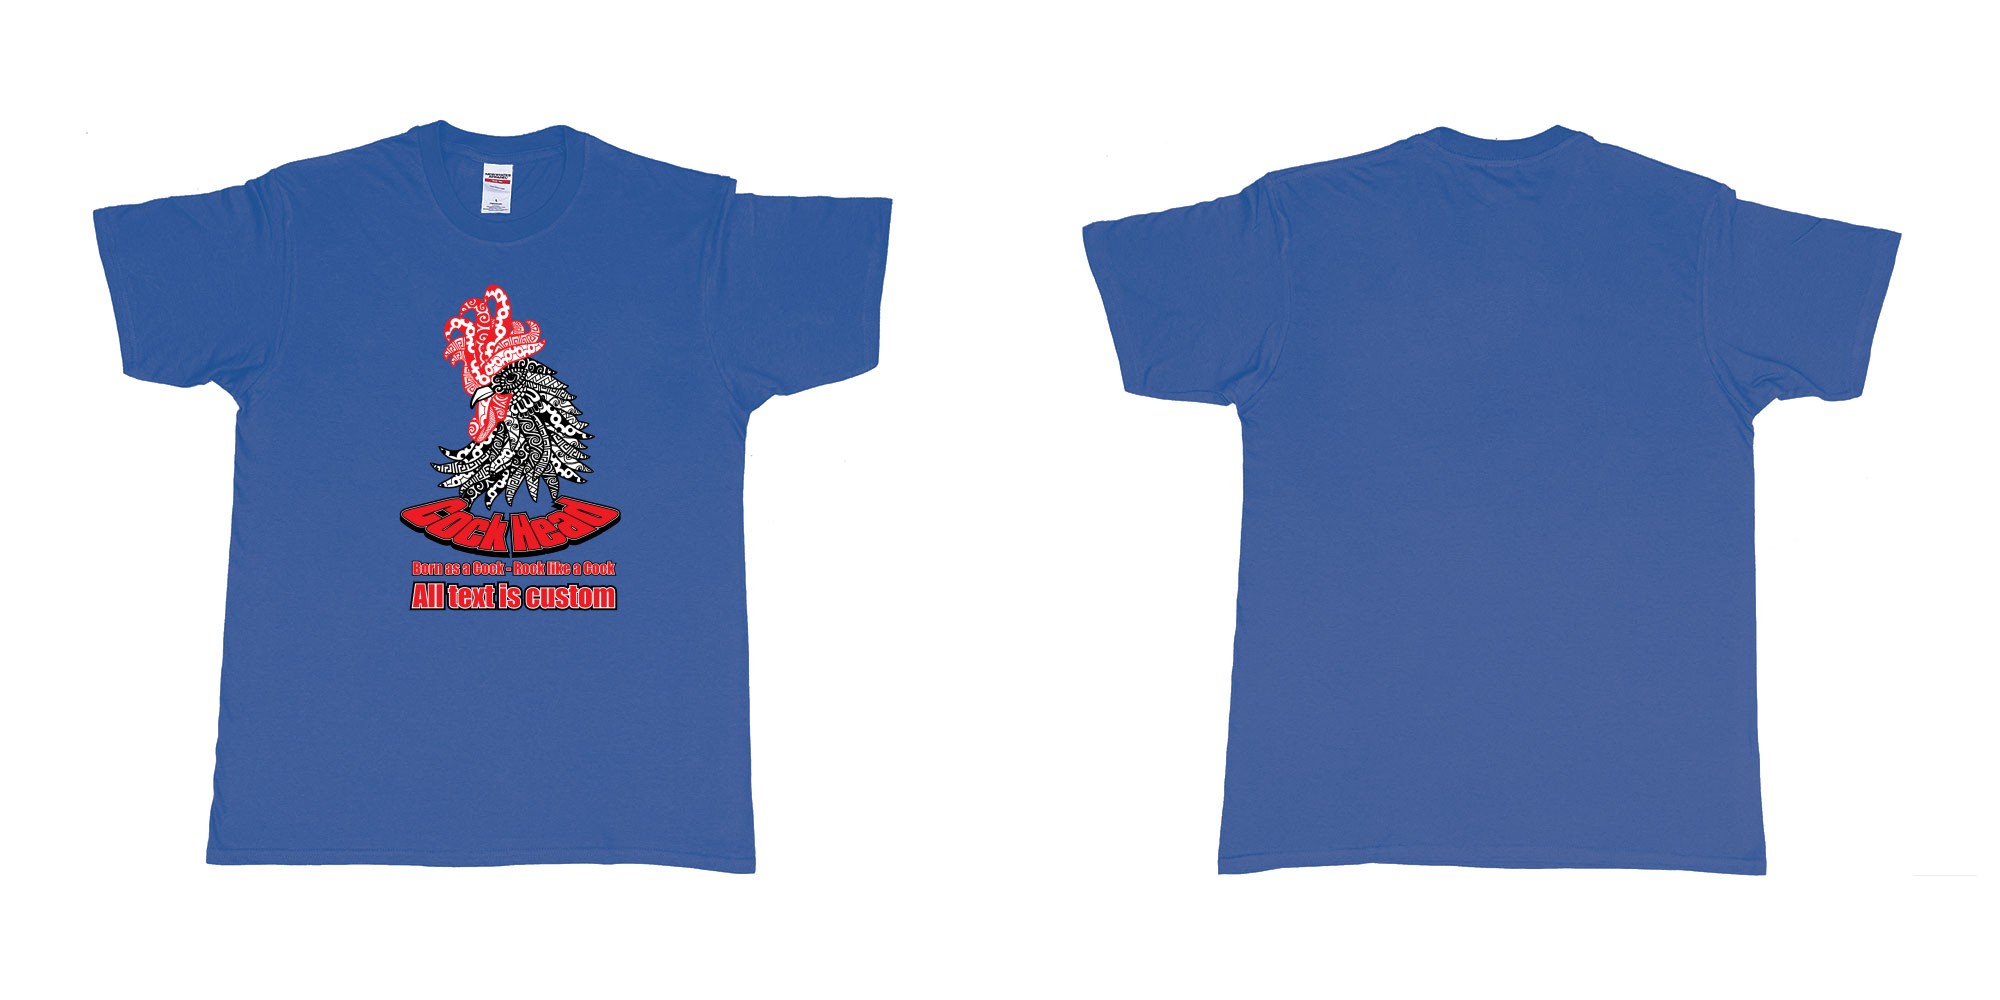 Custom tshirt design cock head rooster zodiac sign in fabric color royal-blue choice your own text made in Bali by The Pirate Way